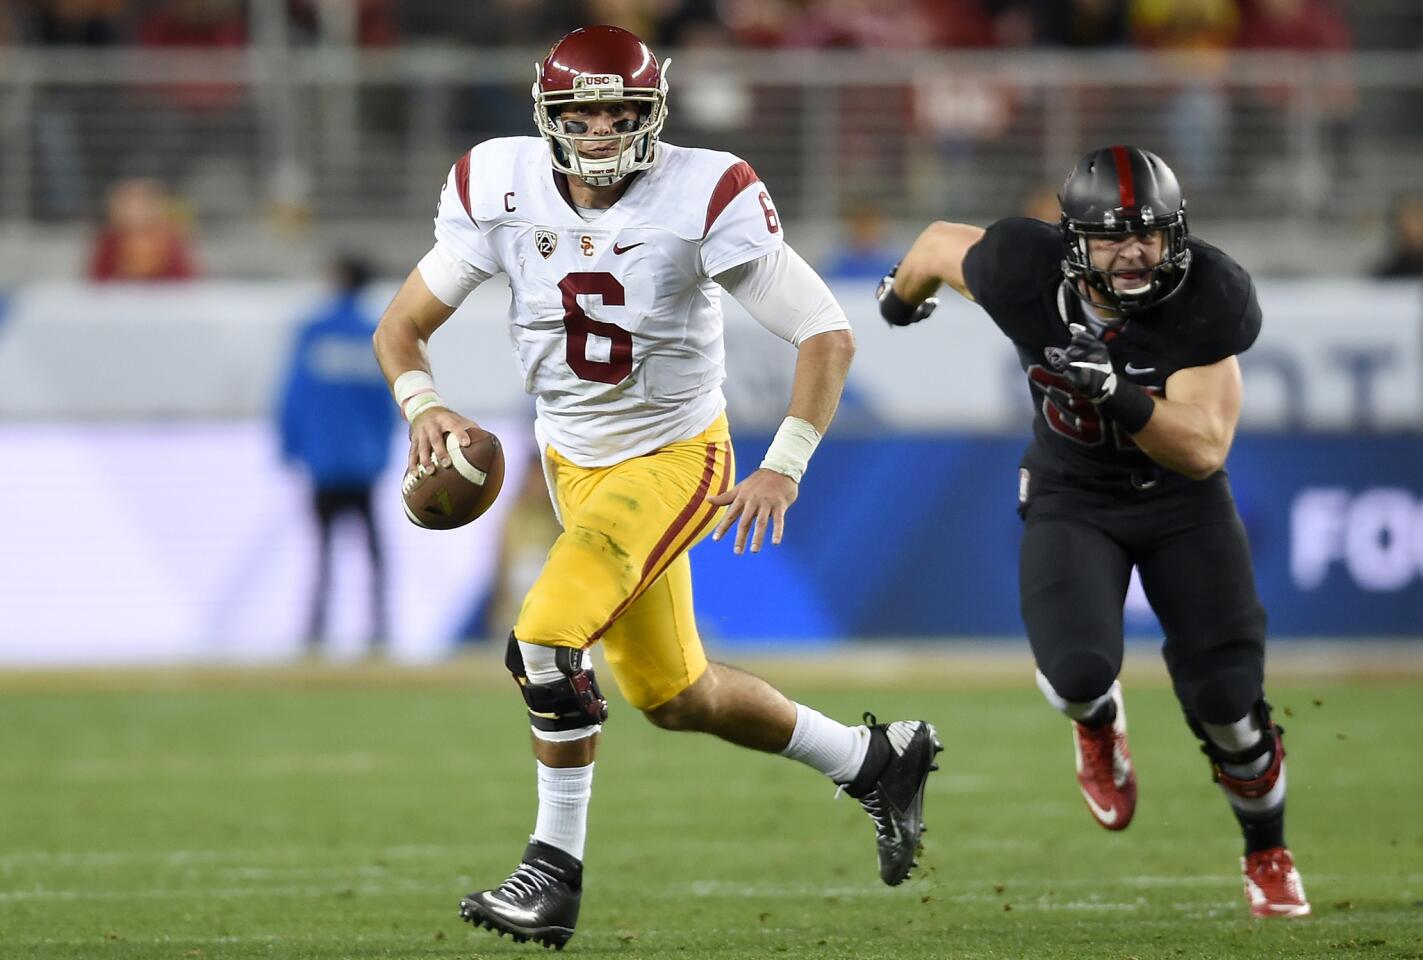 USC's Cody Kessler scrambles with the ball against Stanford during the second quarter of the Pac-12 Championship game at Levi's Stadium on Saturday.